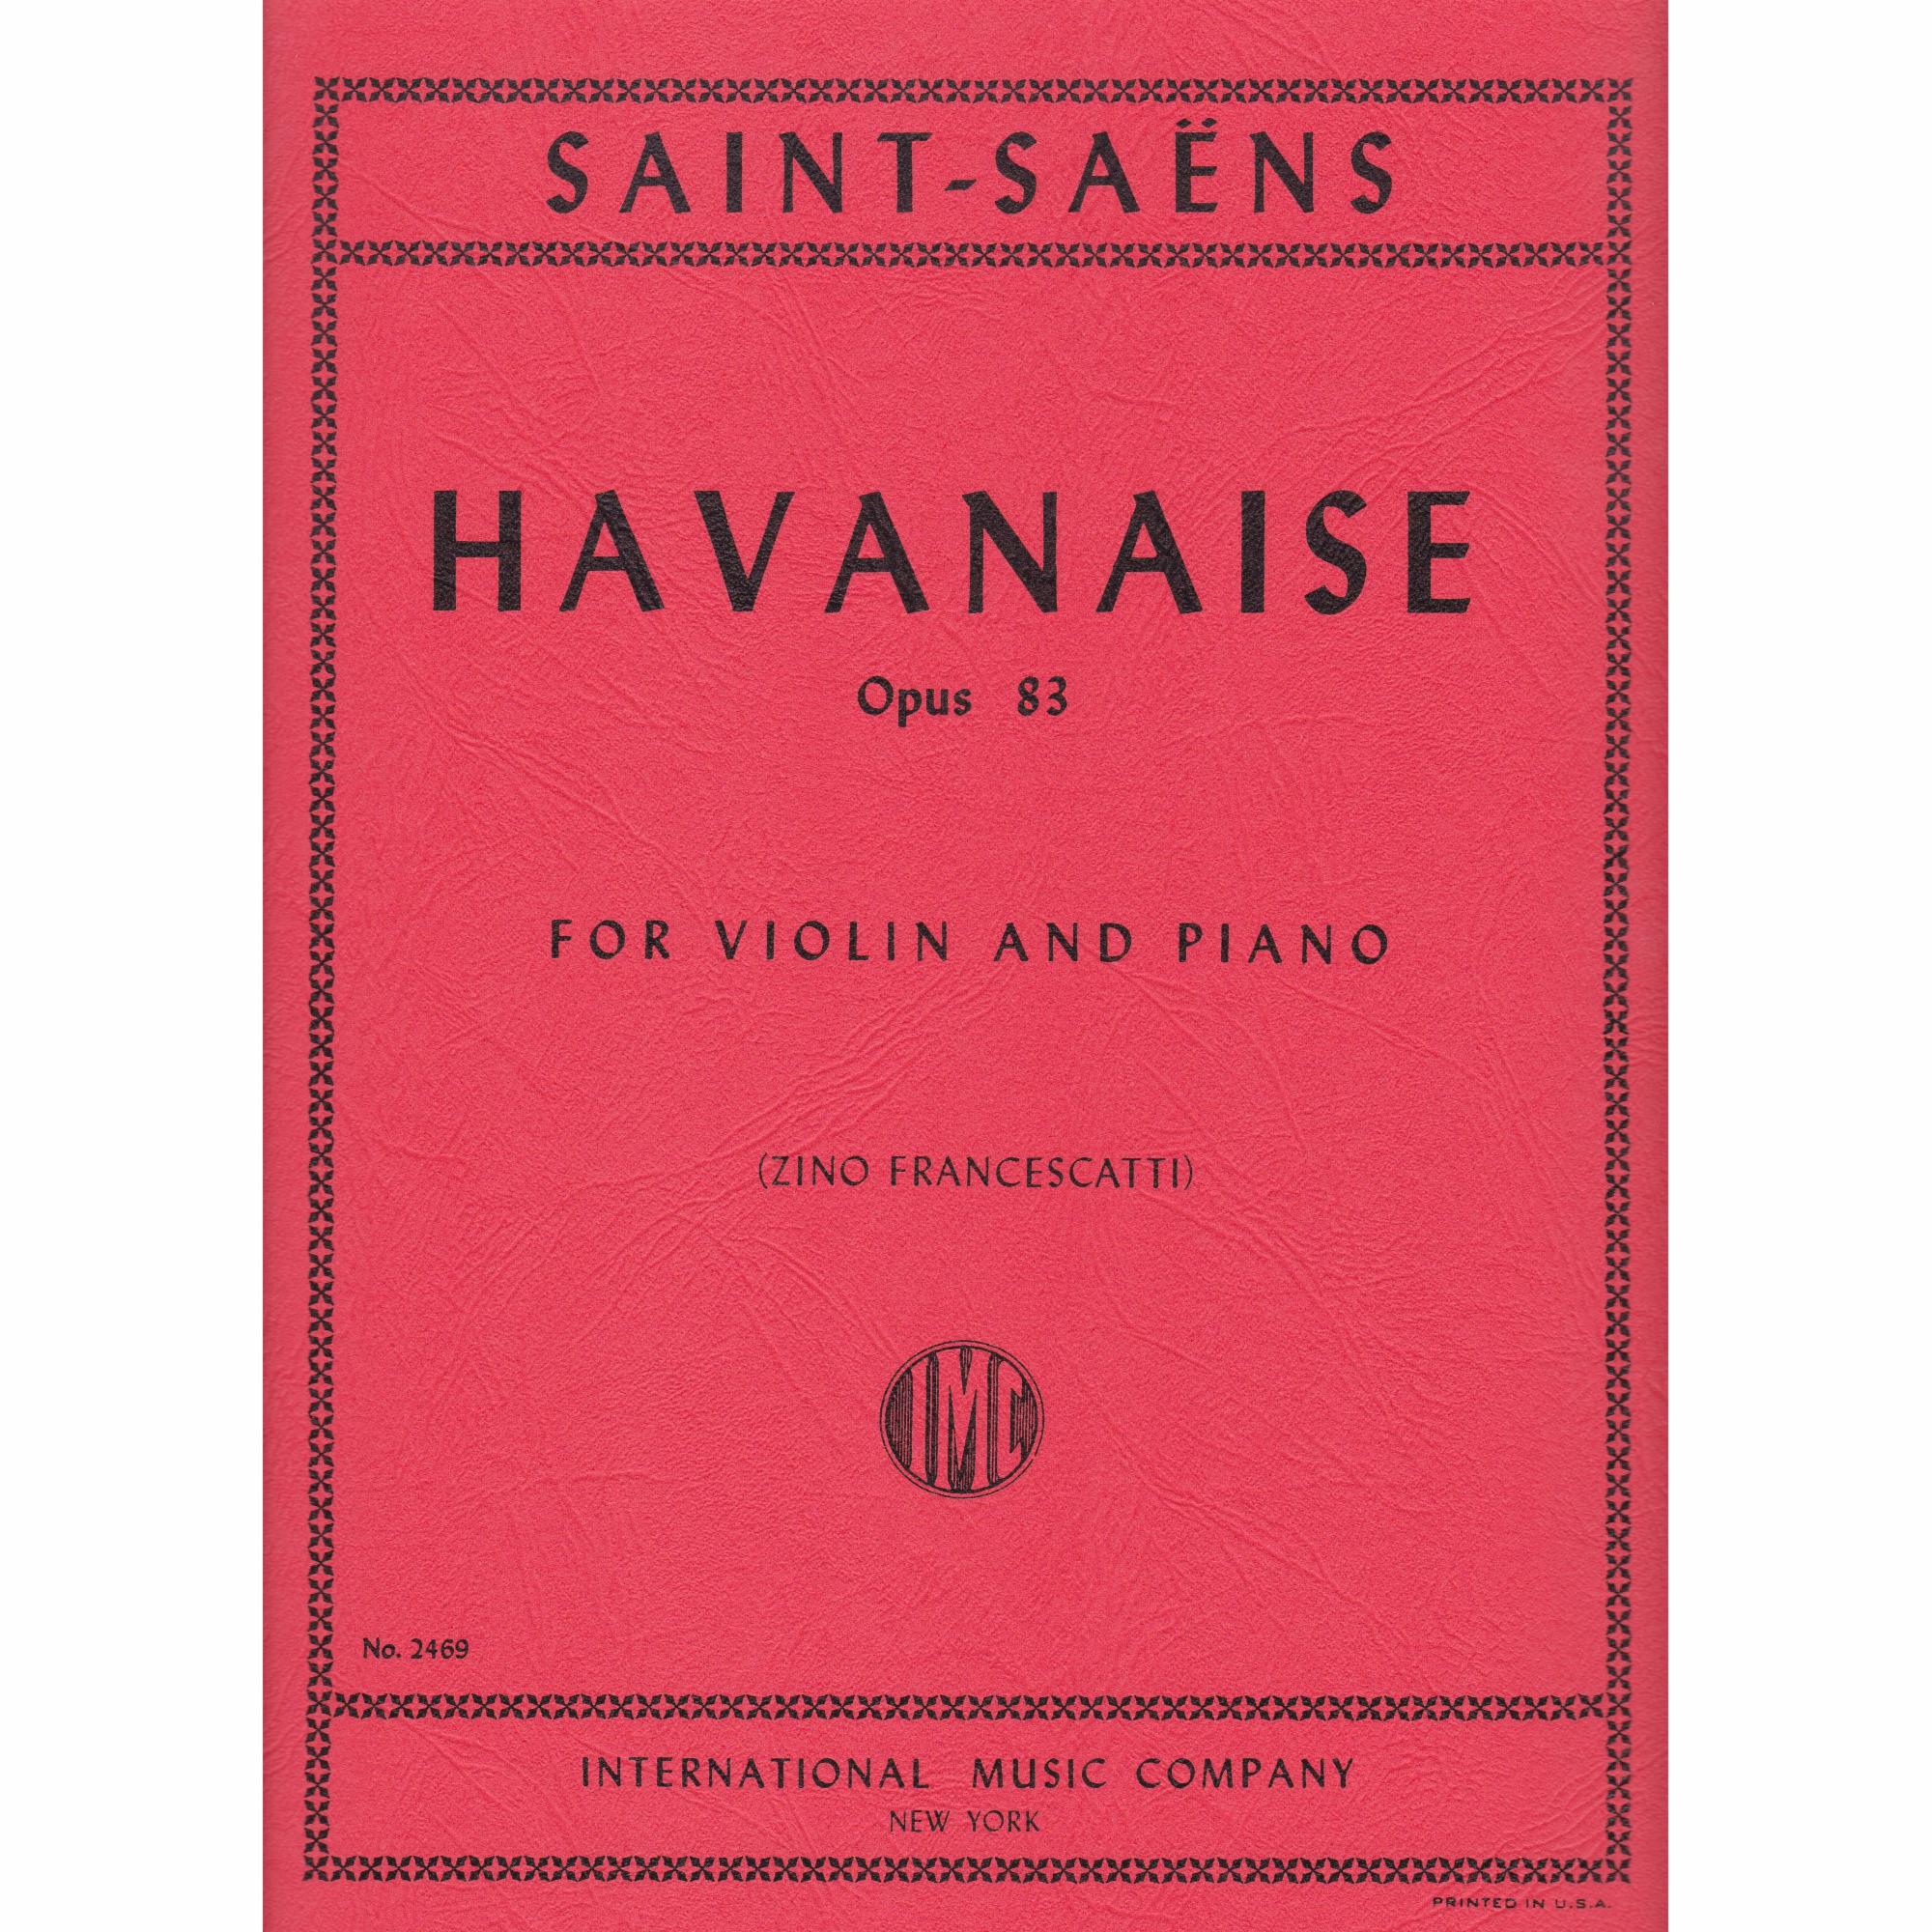 Havanaise for Violin and Piano, Op. 83